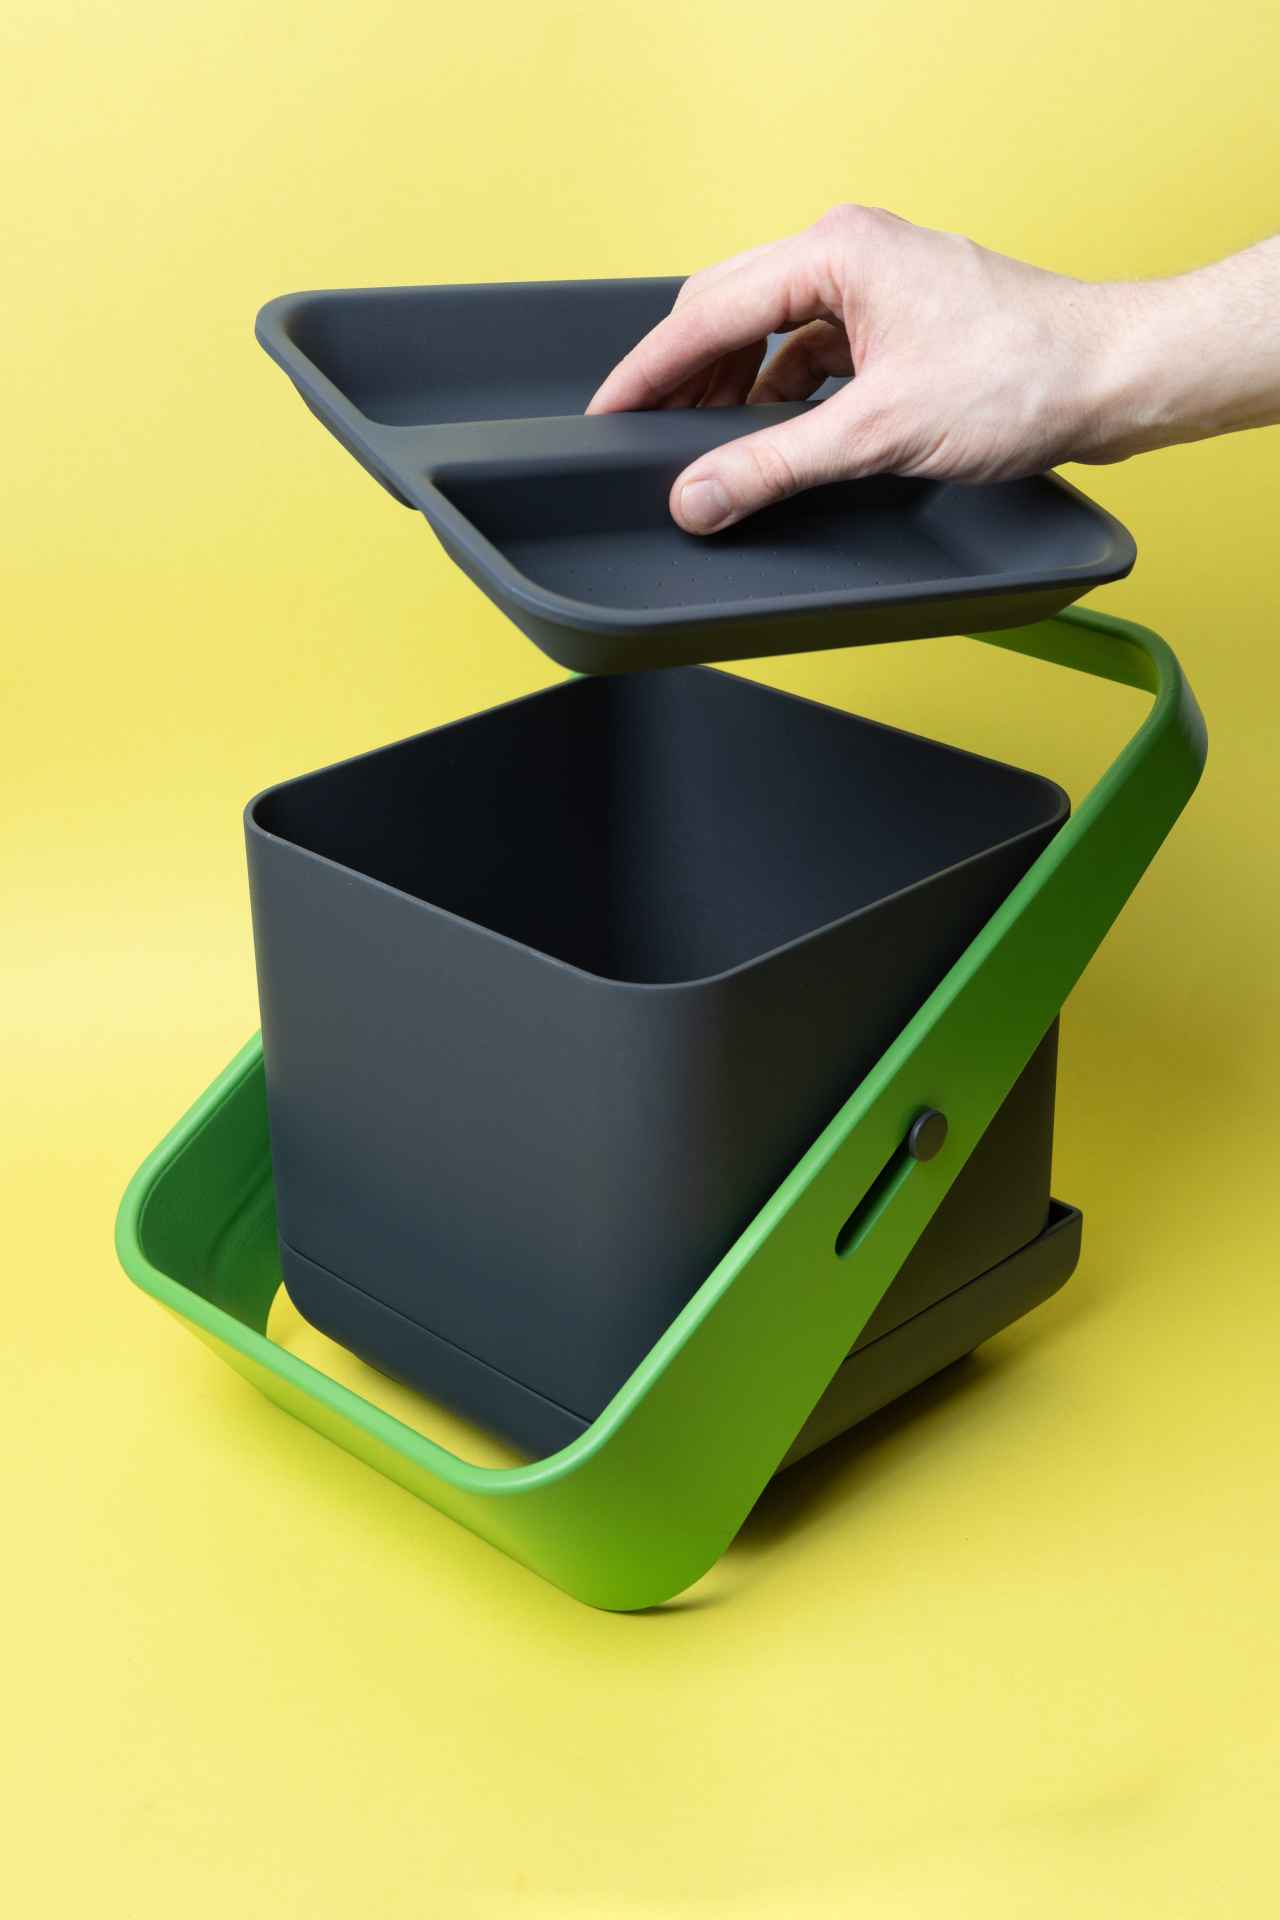 CUBIO with handle in diagonal position, hand lifting the lid